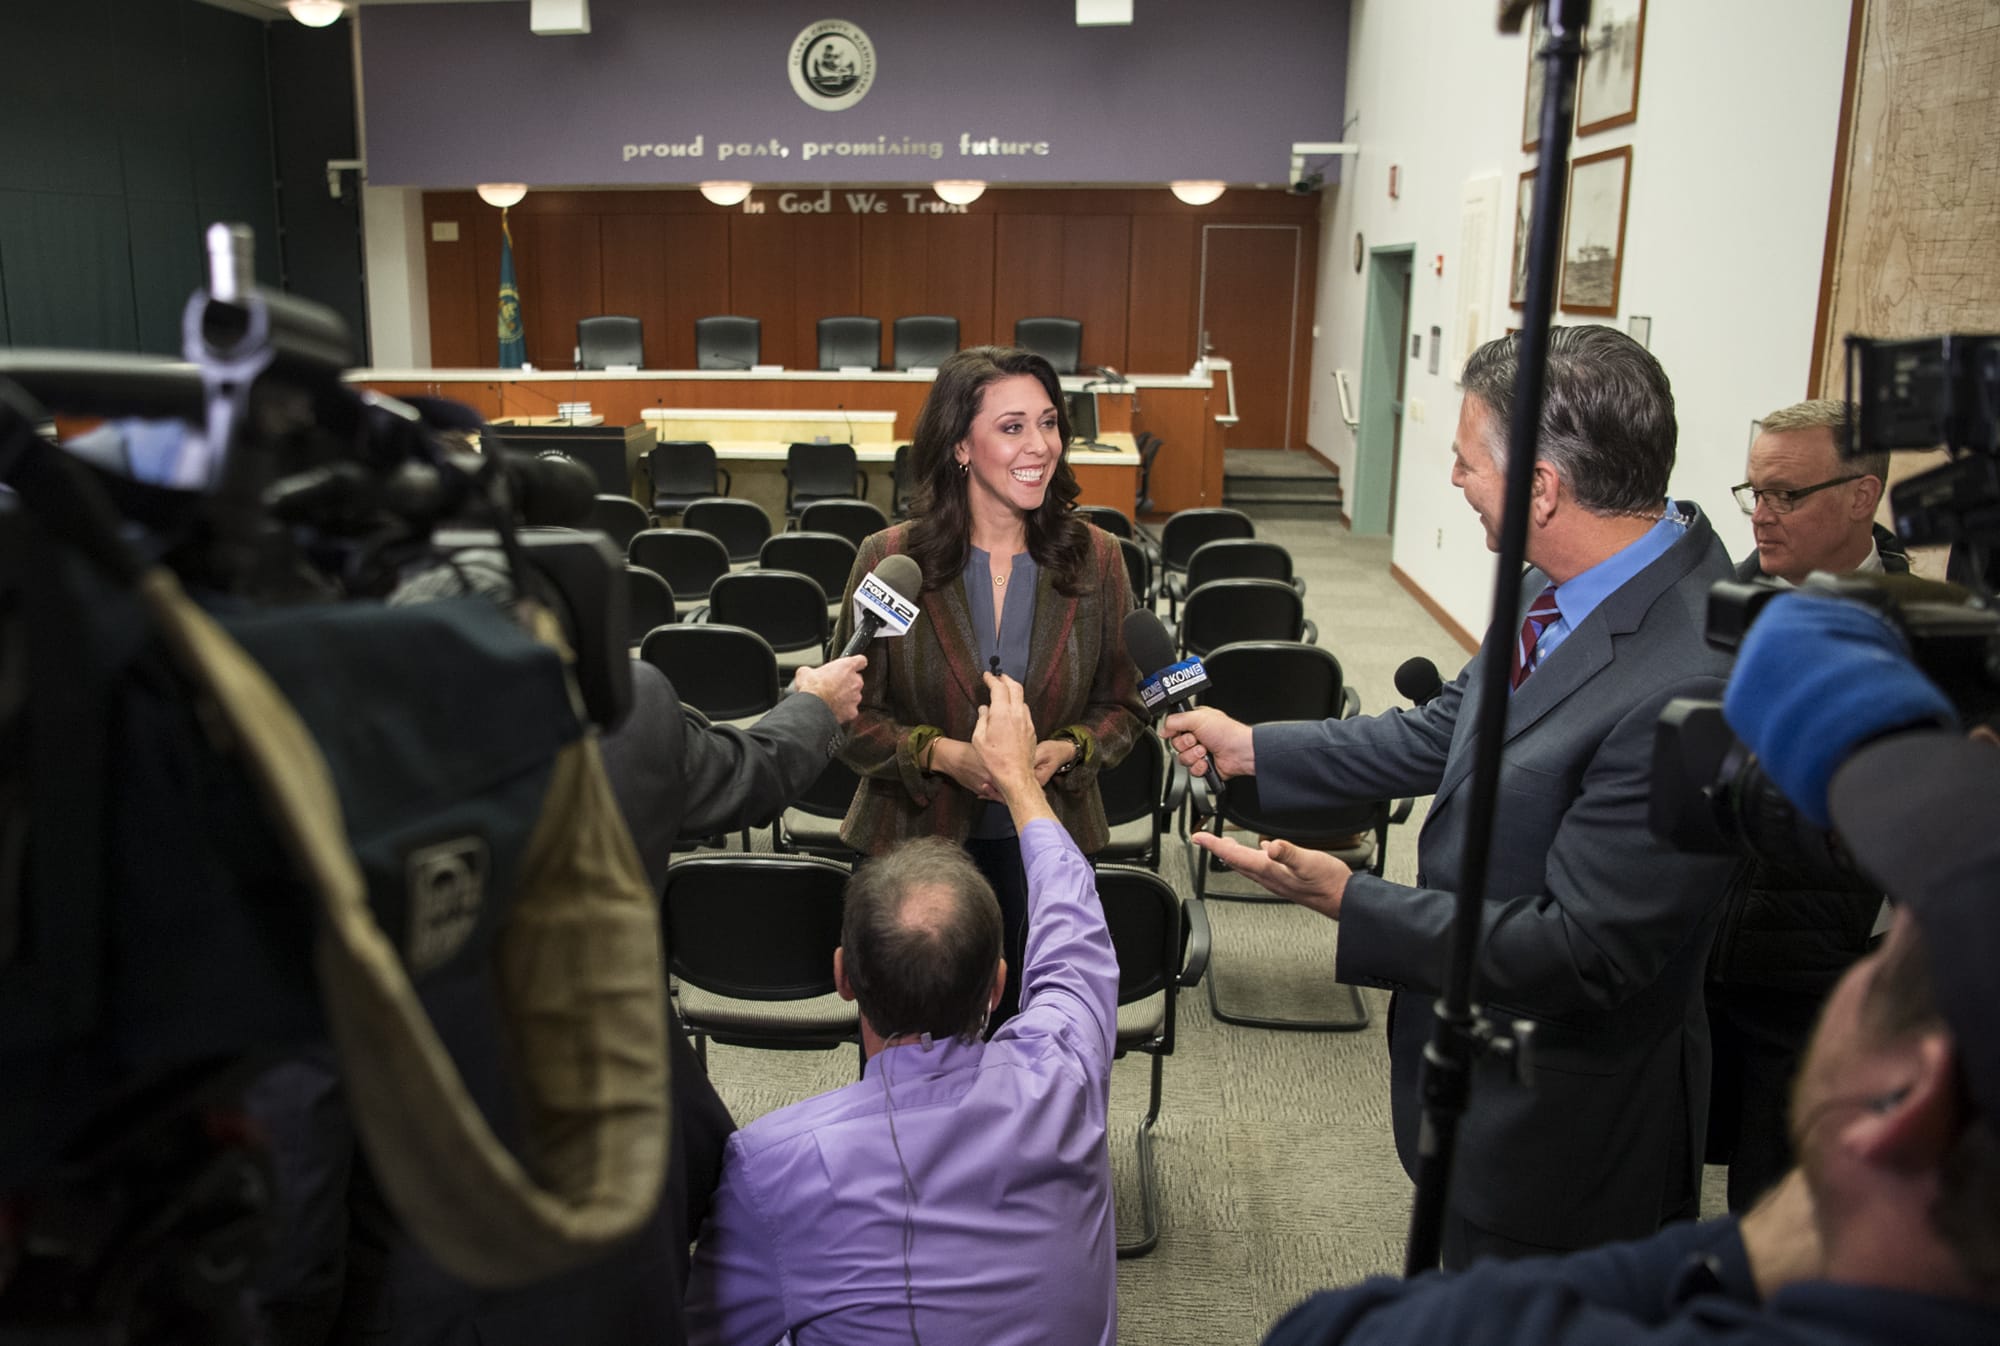 Incumbent U.S. Rep. Jaime Herrera Beutler, R- Battle Ground, talks with the media at the Clark County Public Service Center on Tuesday. Jaime Herrera Beutler says she's humble given the modest lead.